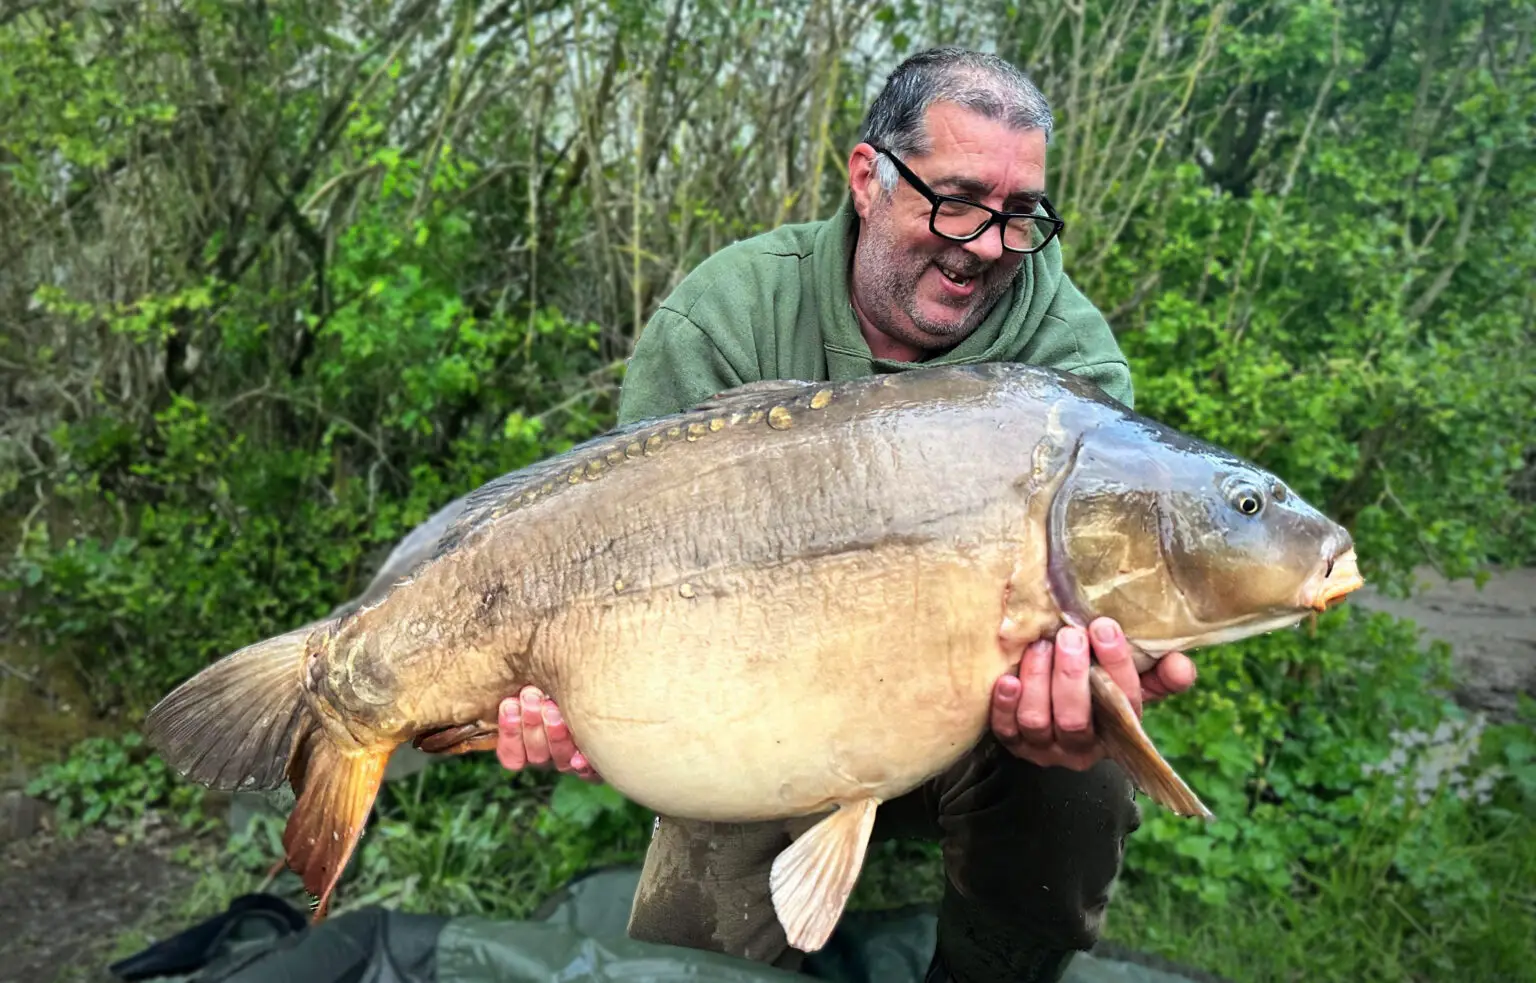 Minty with a new lake record from an extraordinary session